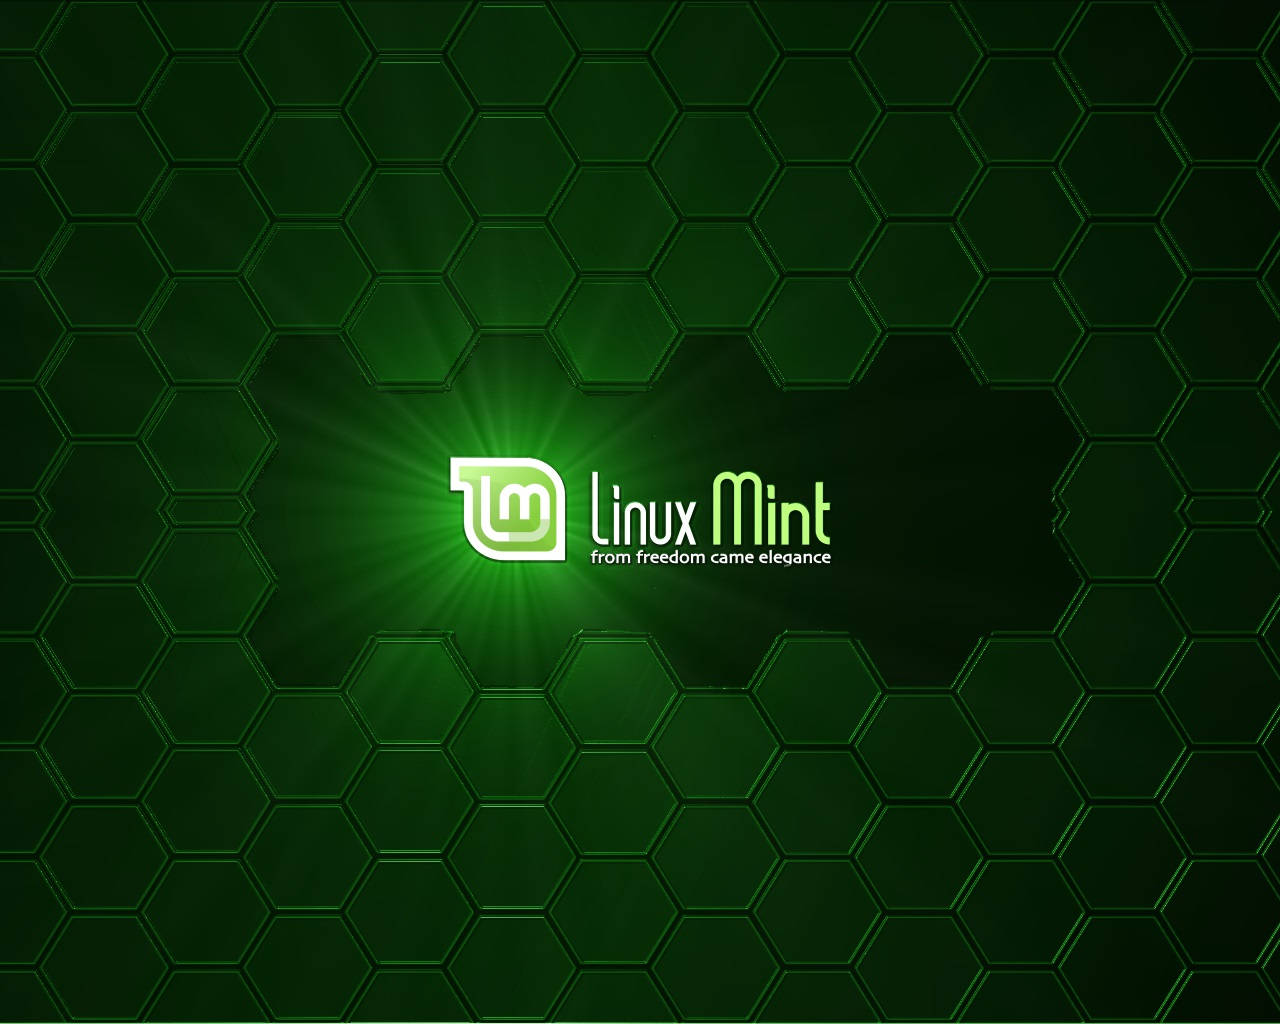 Operating System Linux Mint Logo Hexagon Grid Background